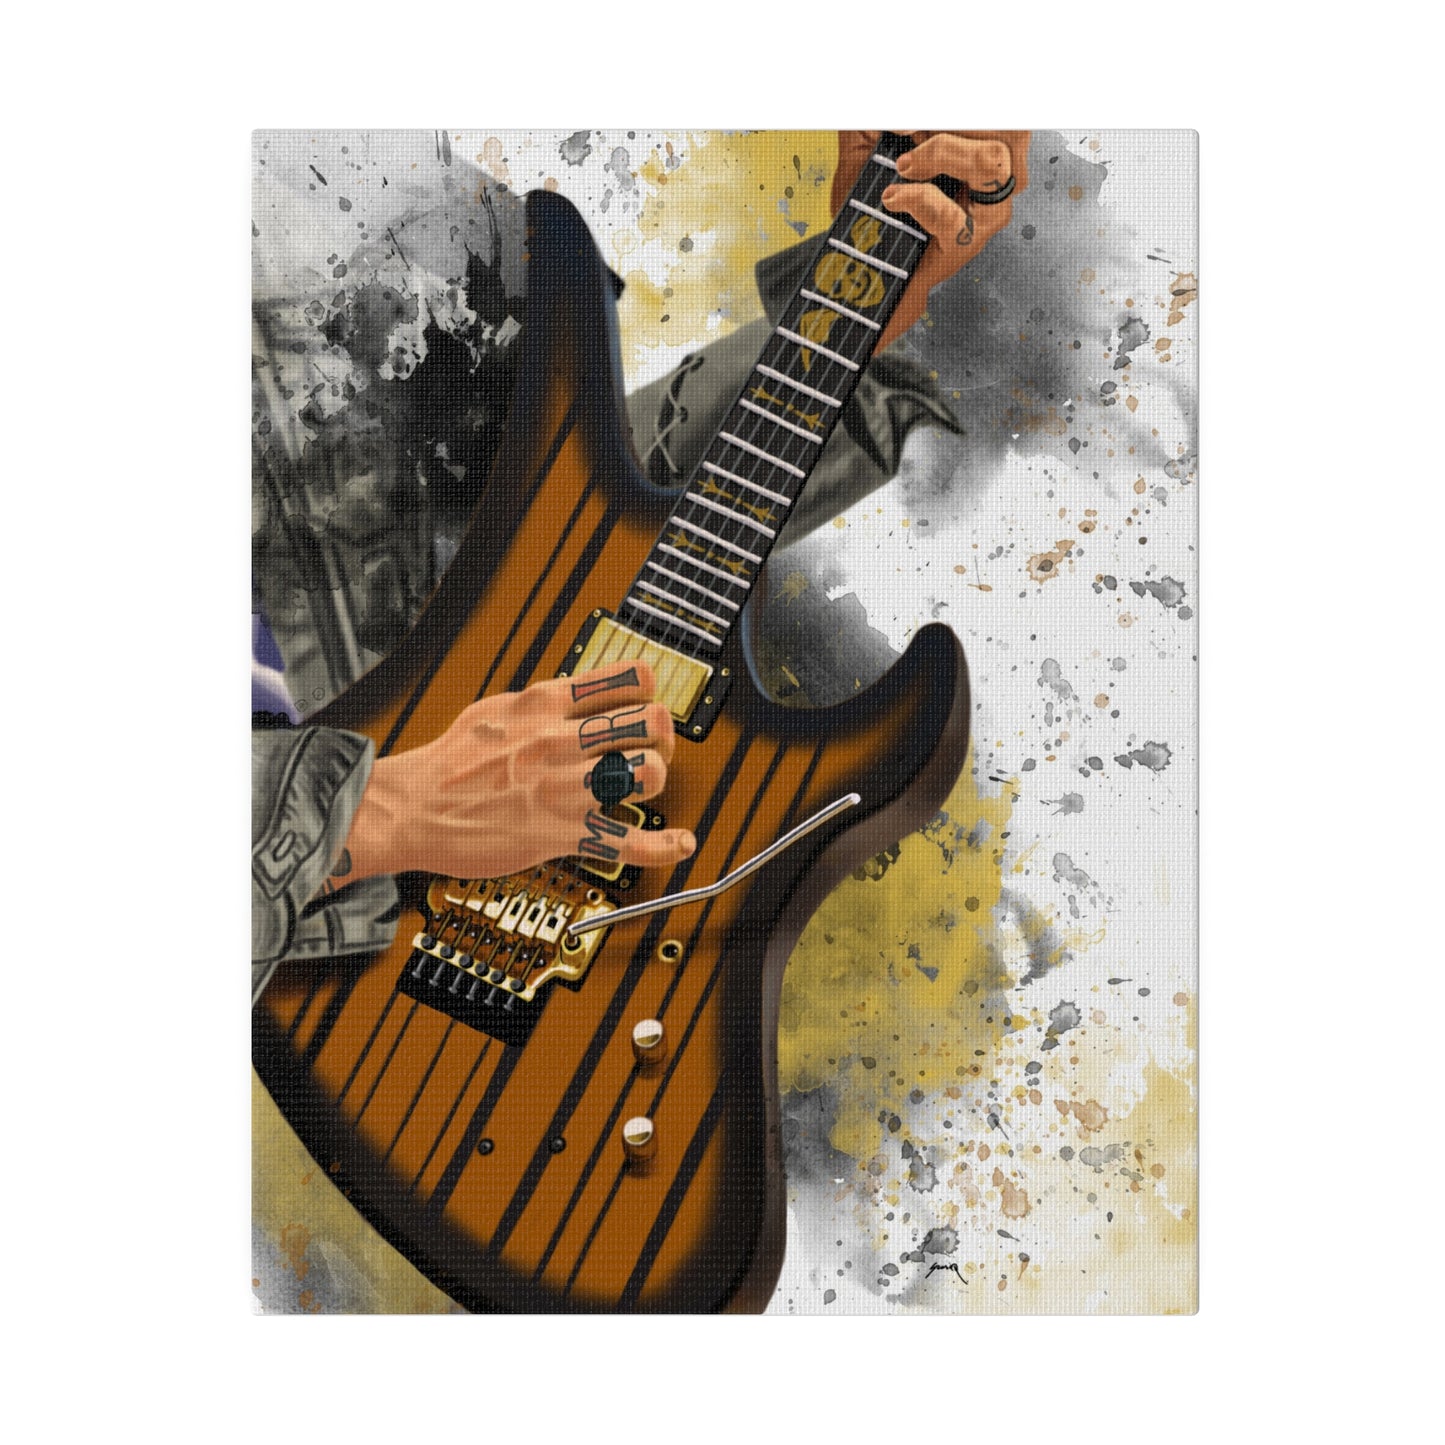 Digital painting of Sin's electric guitar printed on canvas